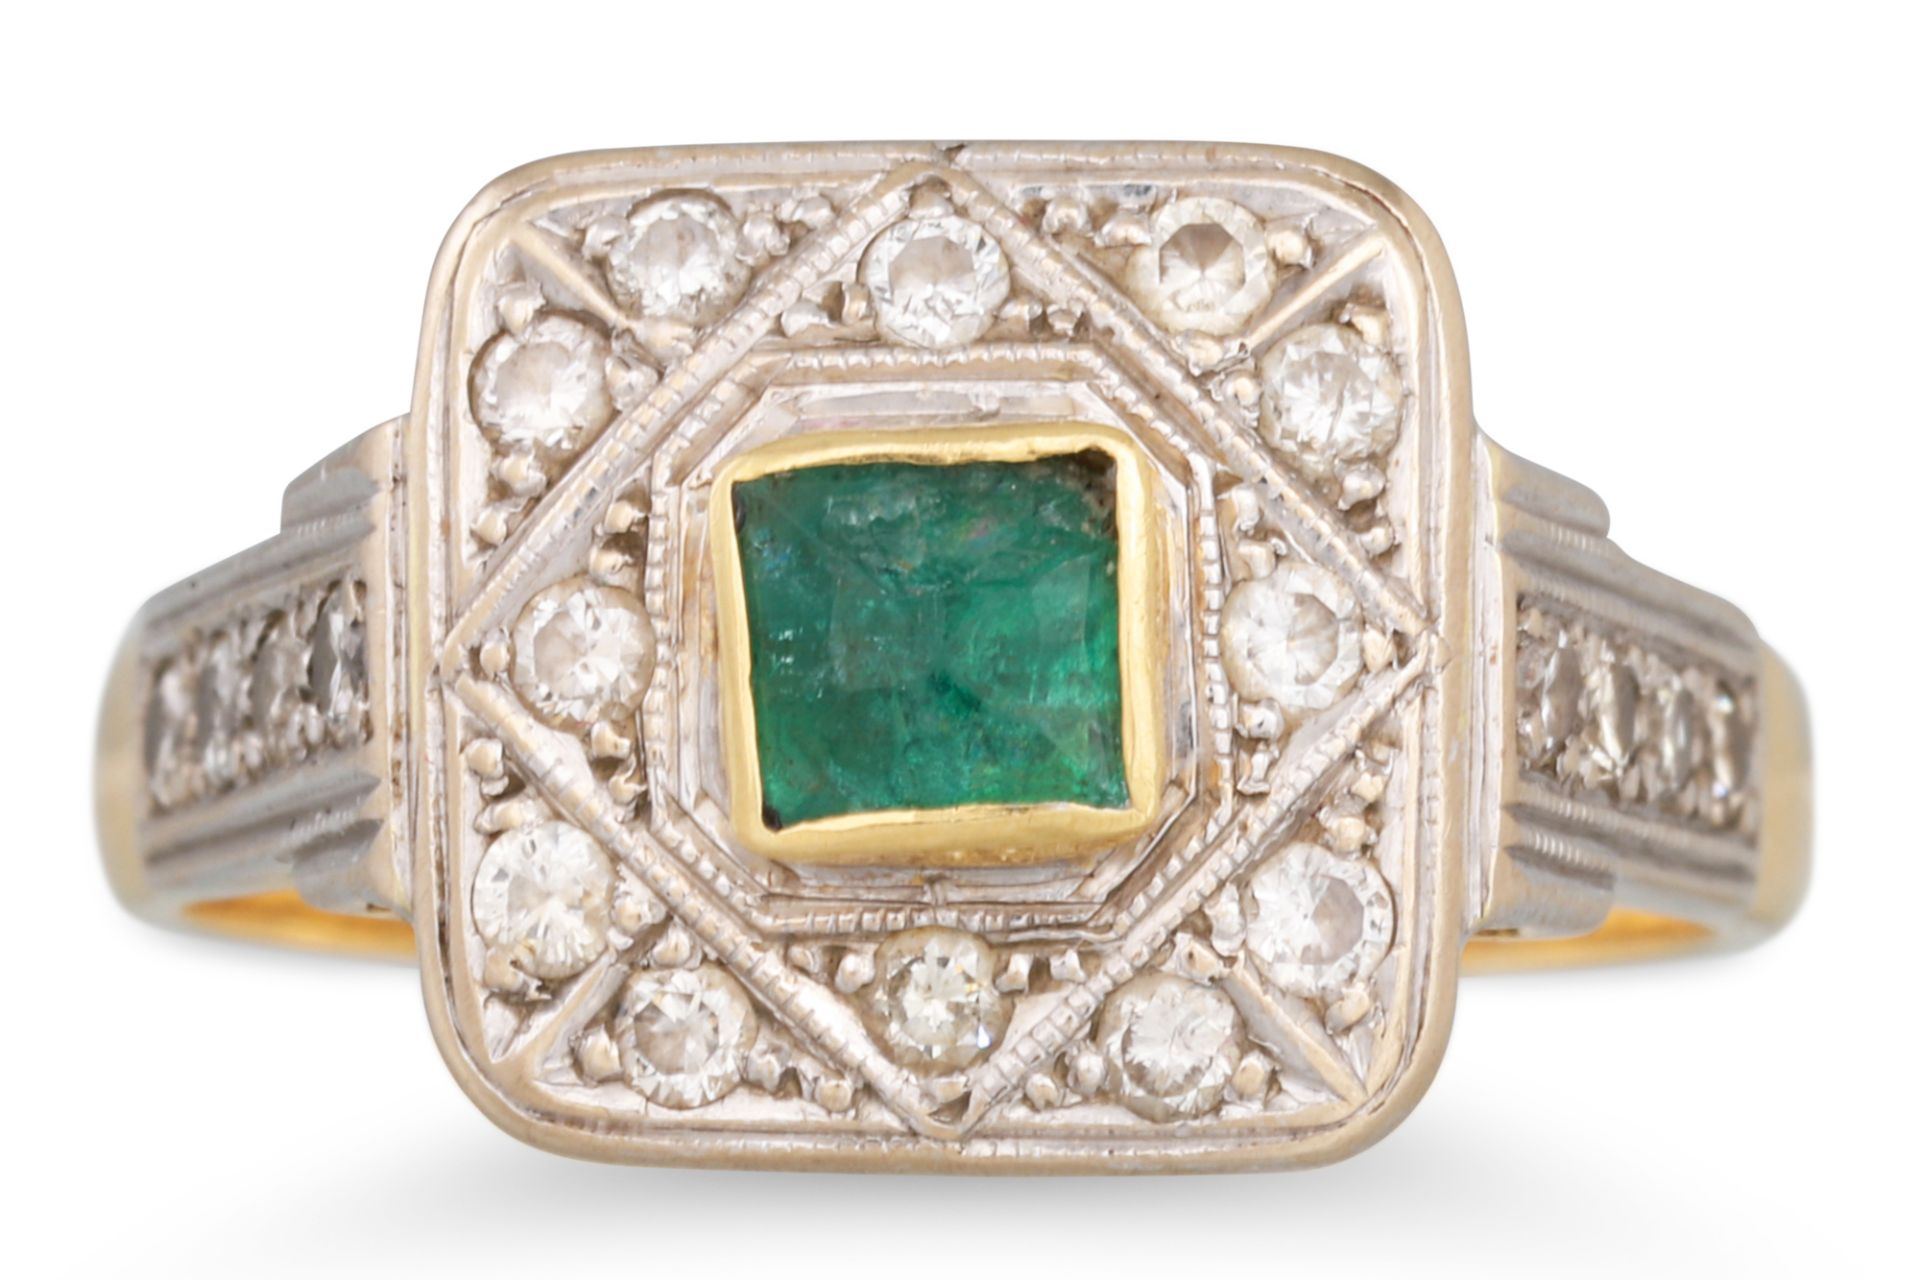 A DIAMOND AND EMERALD CLUSTER RING, mounted in yellow gold. Size: L